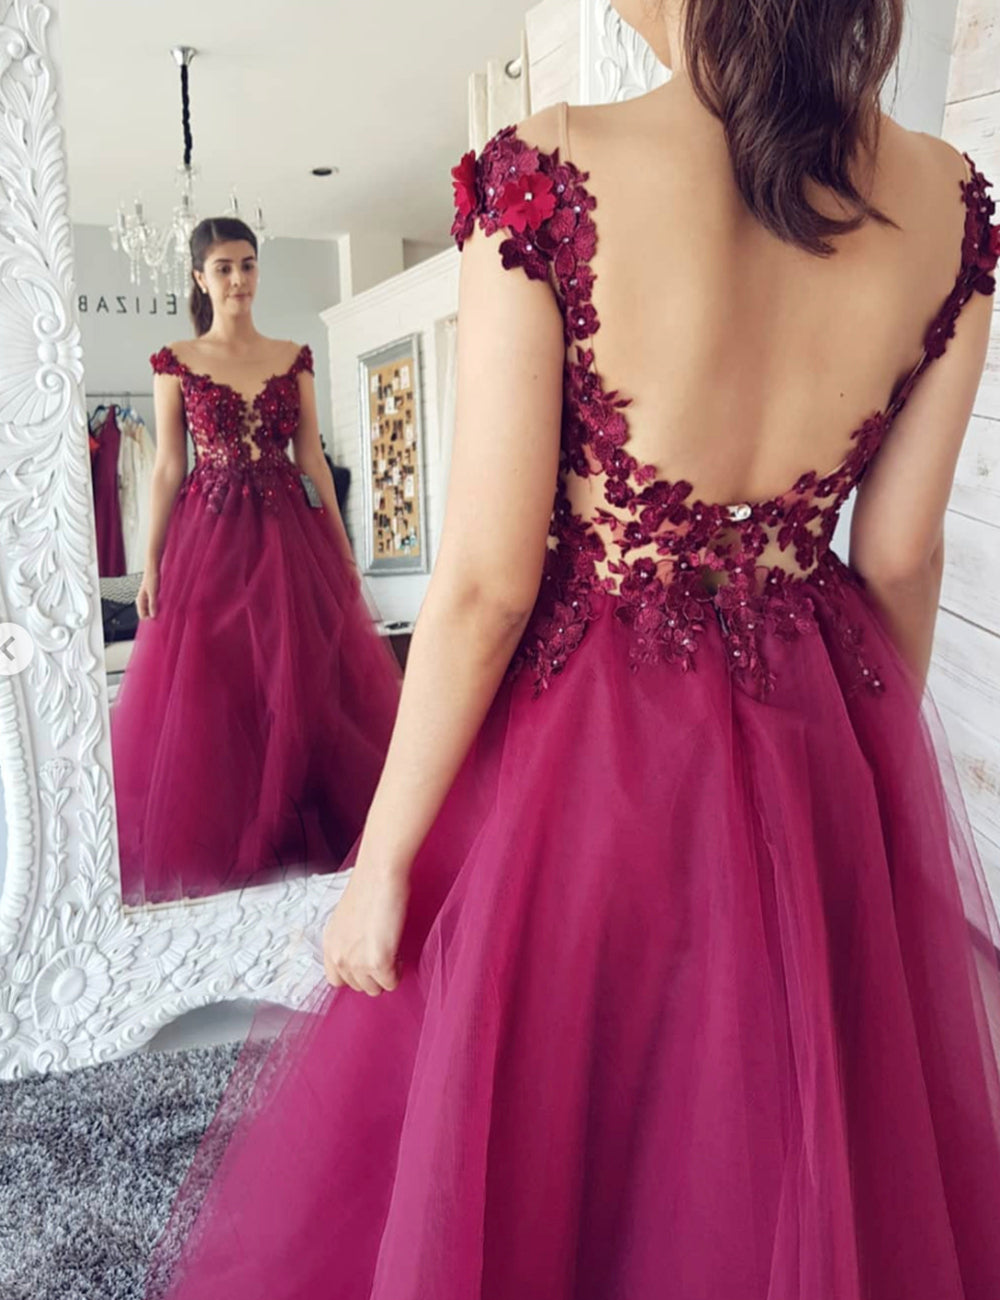 ELEGANT TULLE LACE LONG BALL GOWN prom DRESS   cg11019